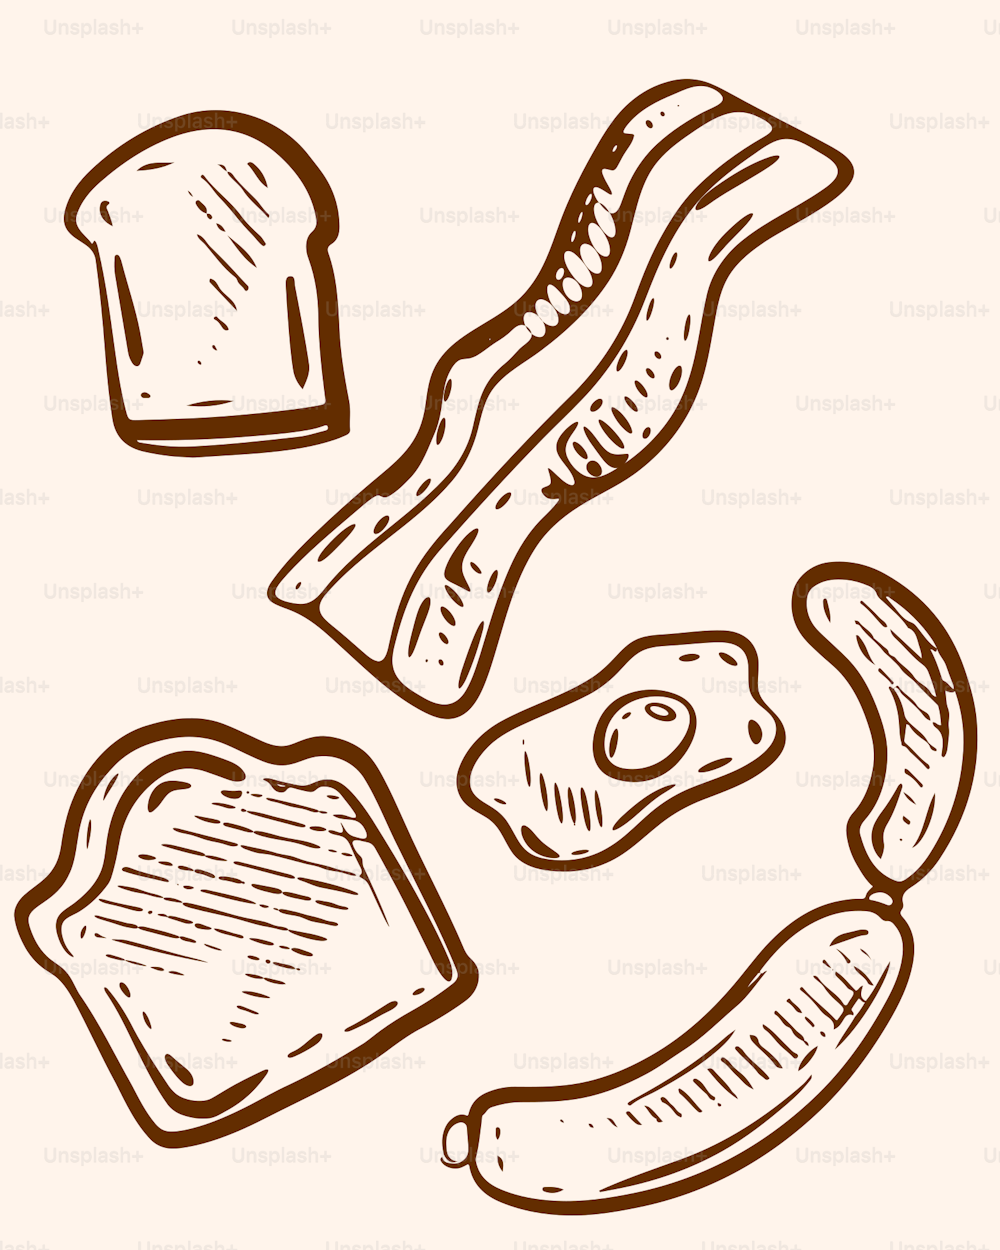 a drawing of a toast, bacon, and bread